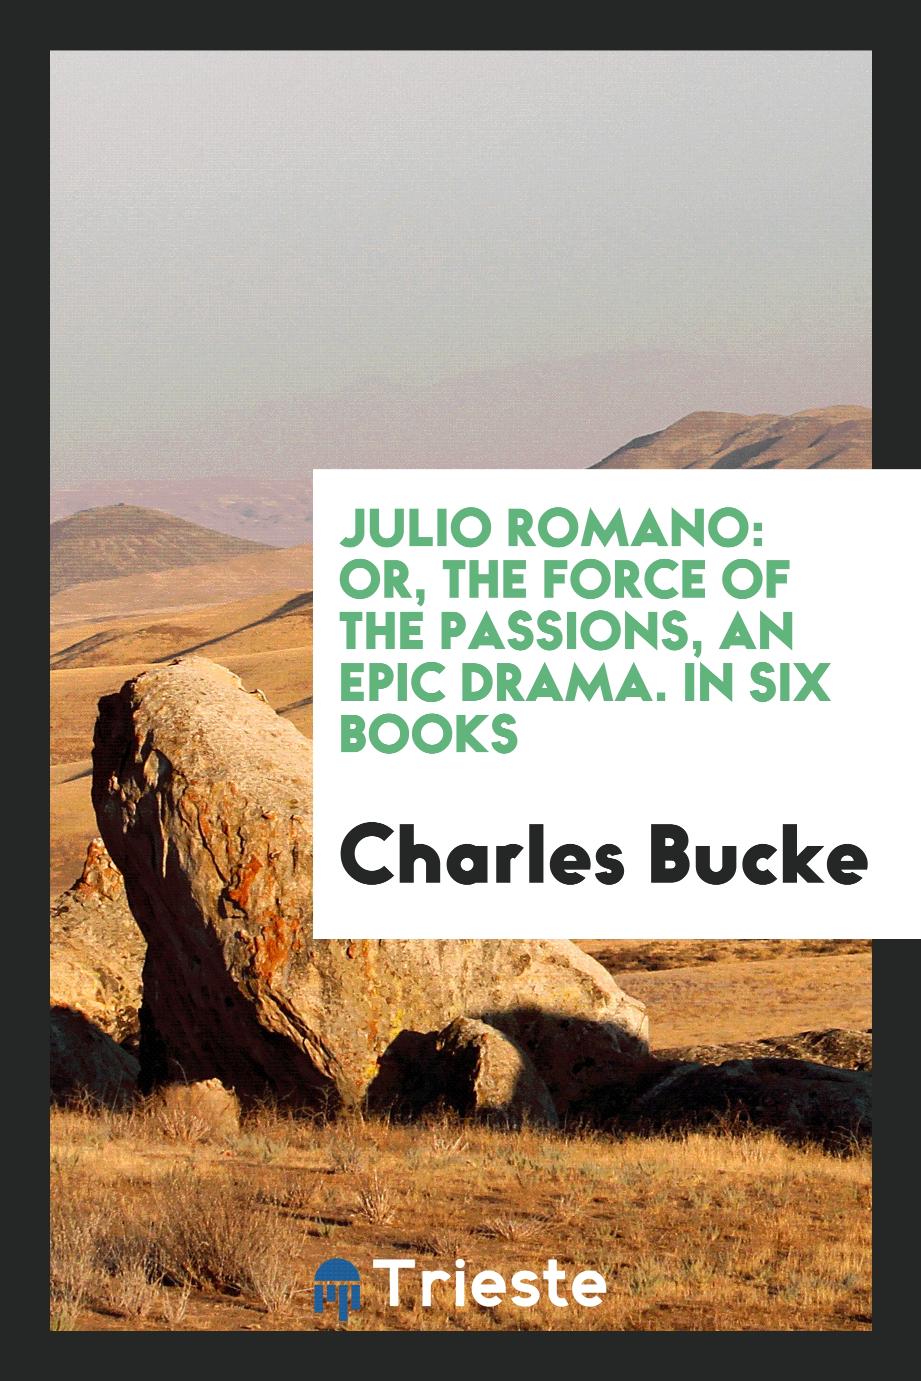 Julio Romano: Or, the Force of the Passions, an Epic Drama. In Six Books